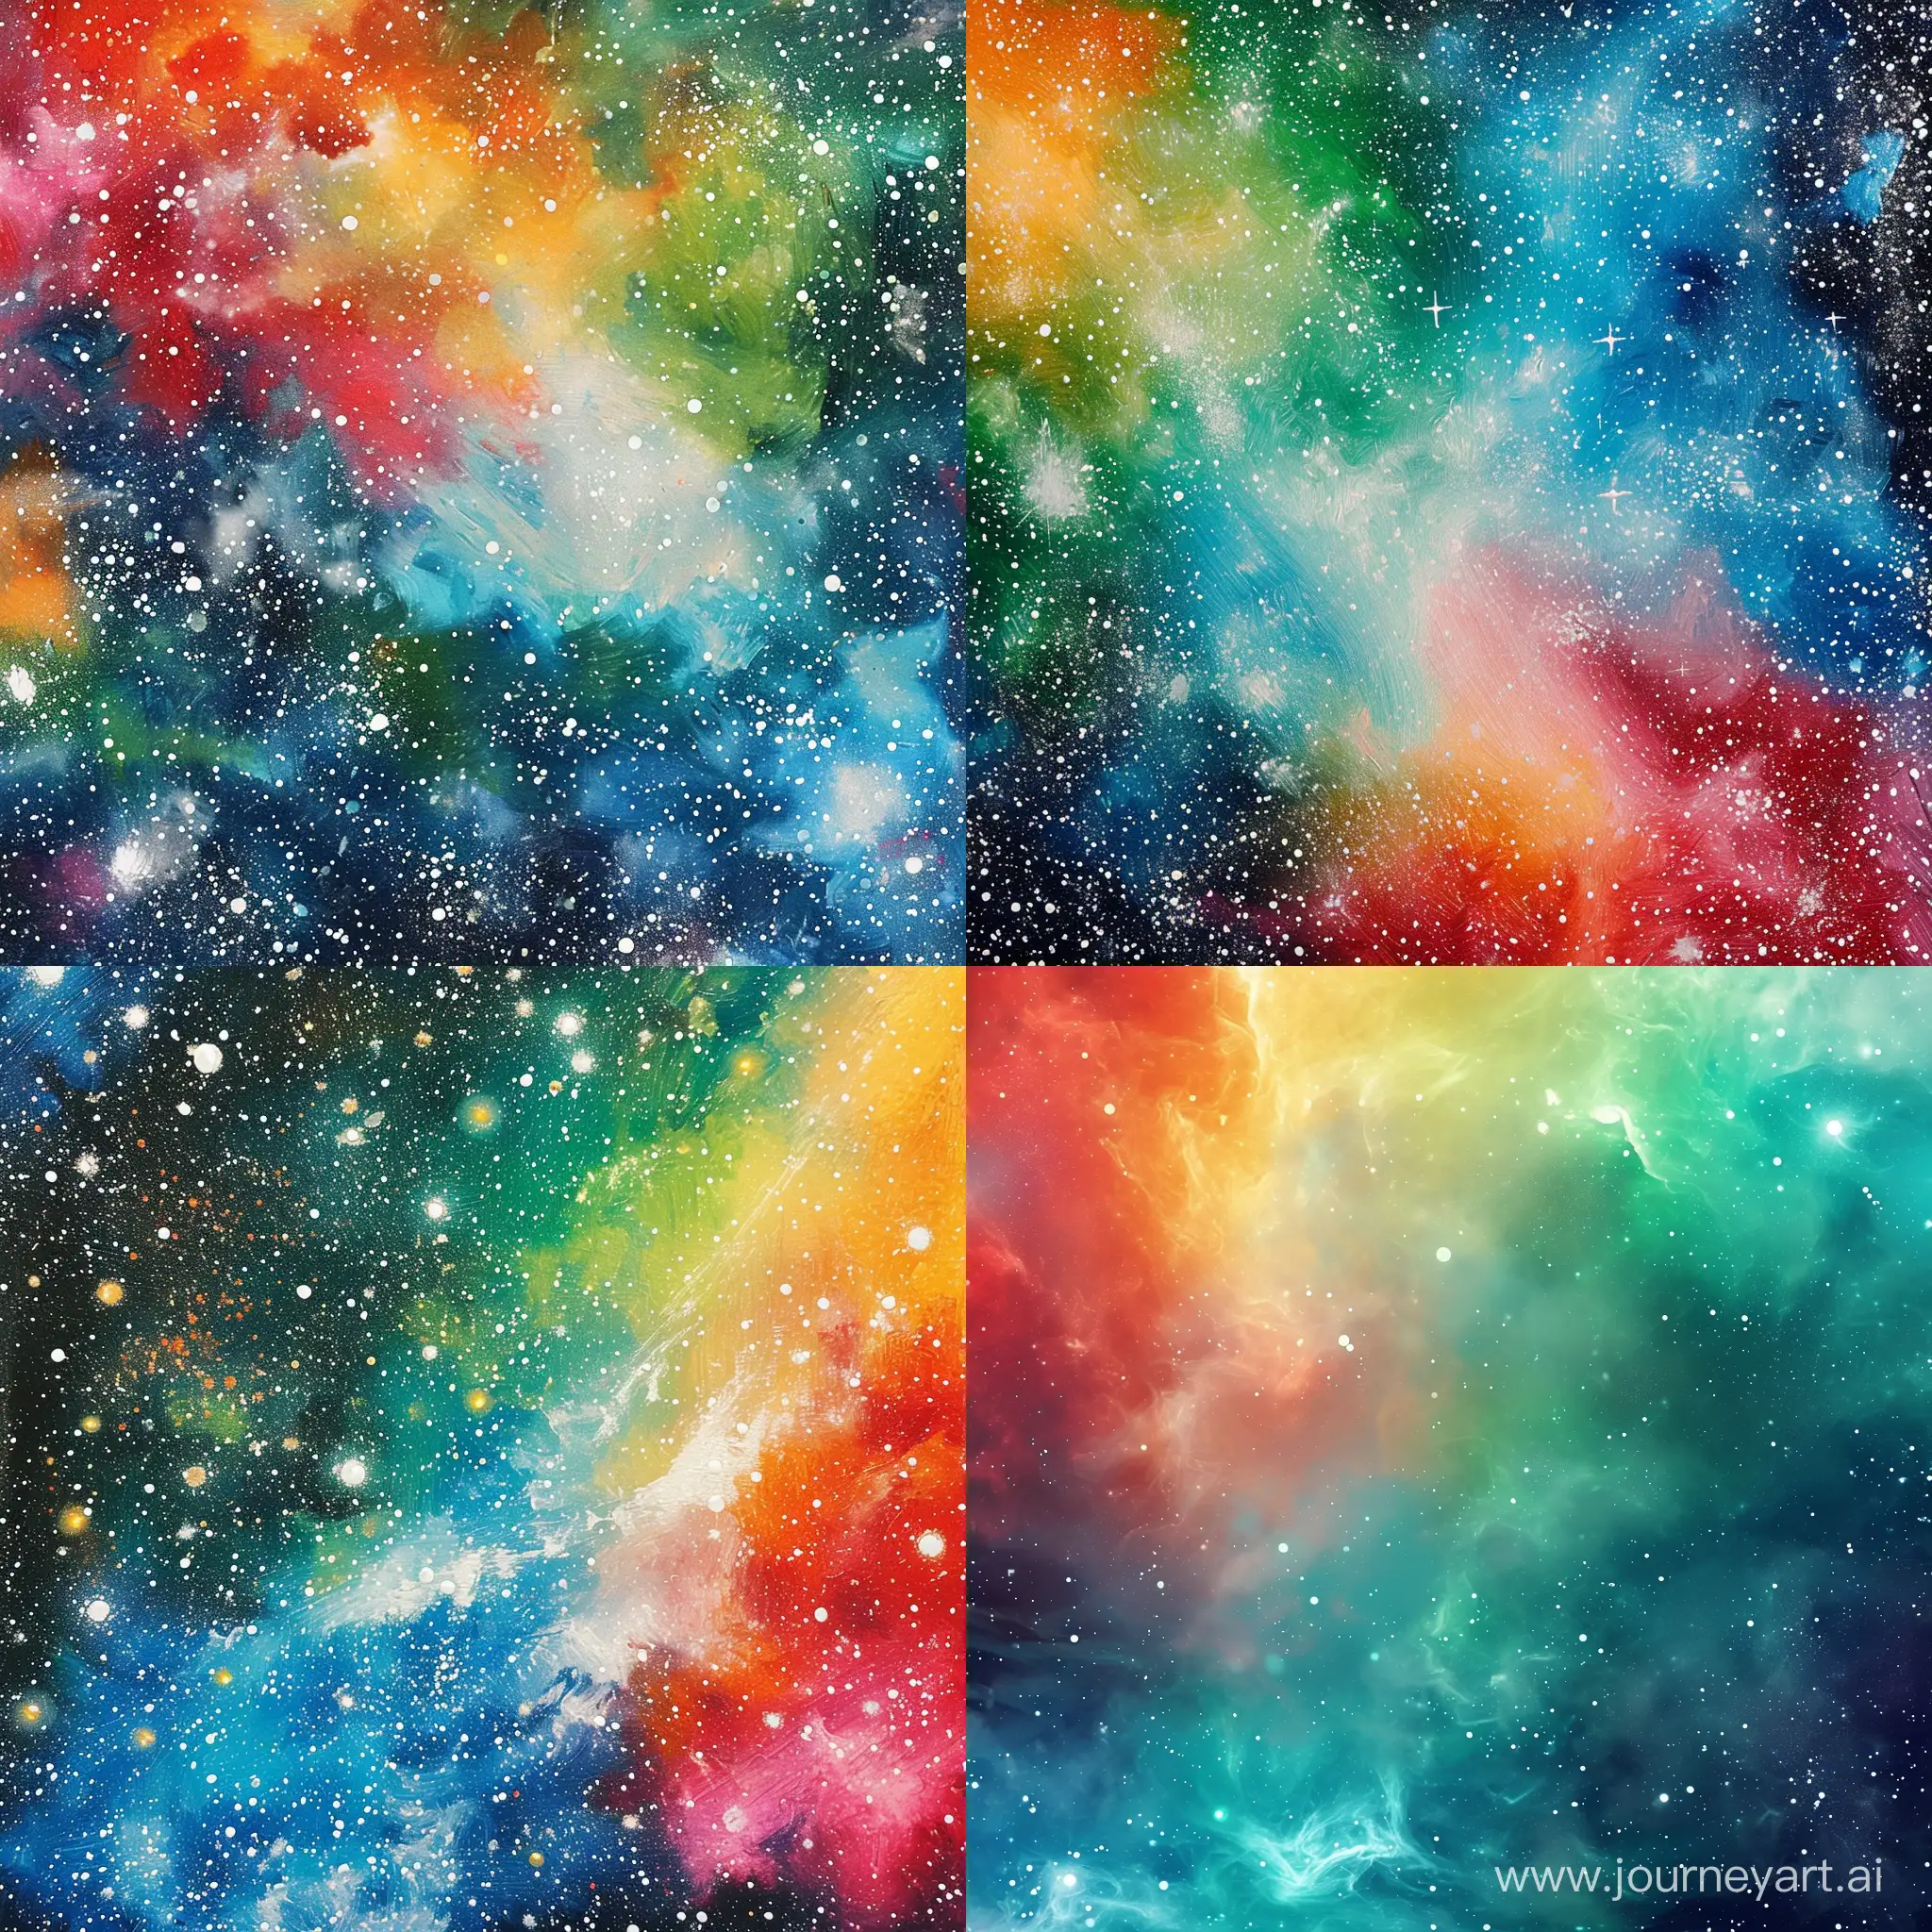 Vibrant-Galaxy-Constellations-in-Shades-of-Blue-Green-Red-Orange-Yellow-and-Pink